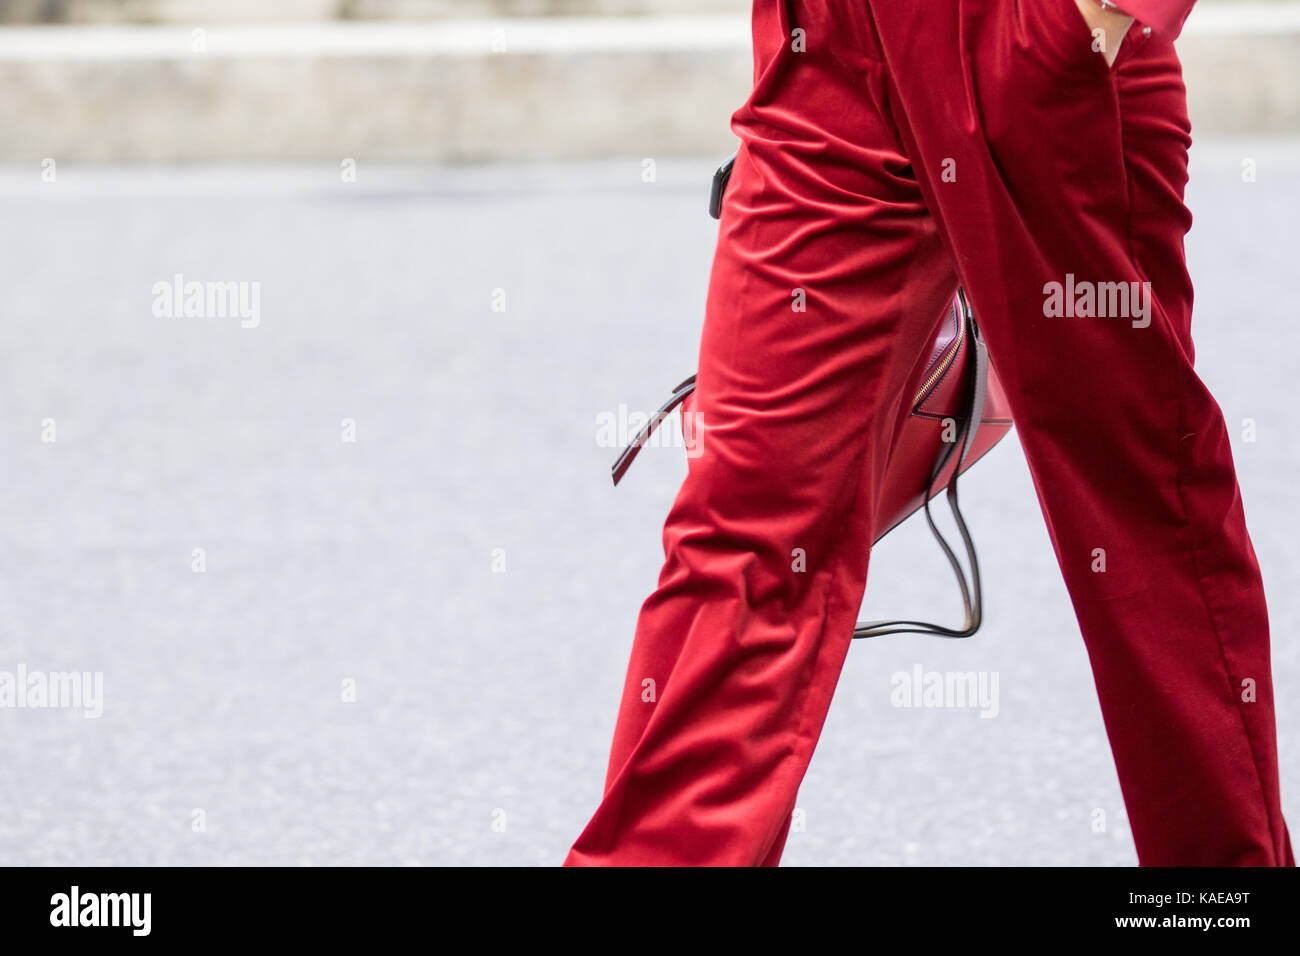 Milan, Italy - September 22, 2017: Model wearing a pair of red pants and red purse during the Armani parade, photographed on the street Stock Photo